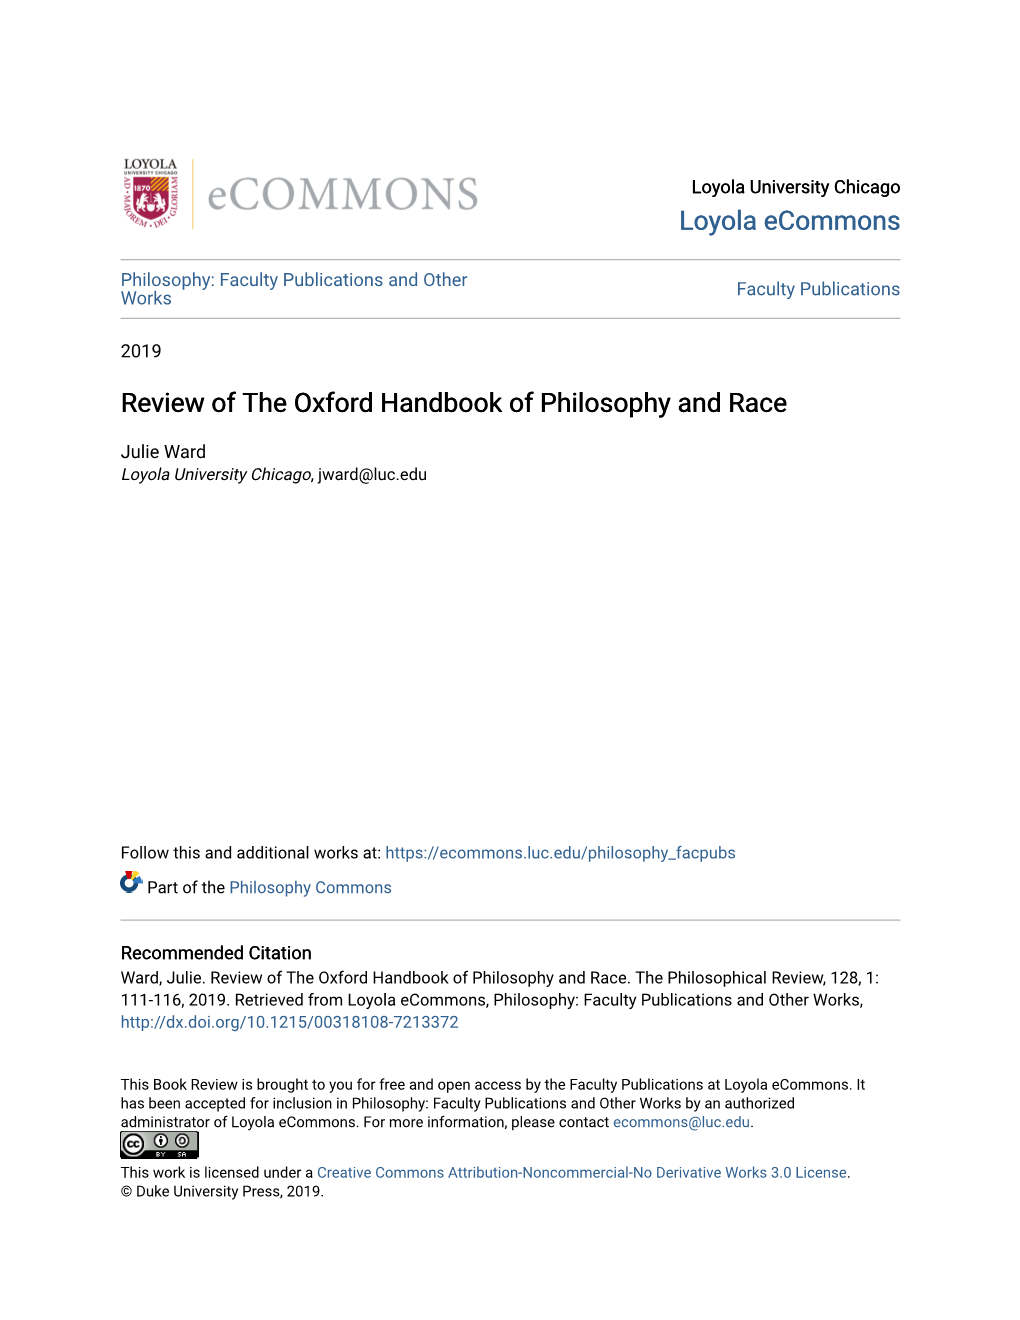 Review of the Oxford Handbook of Philosophy and Race